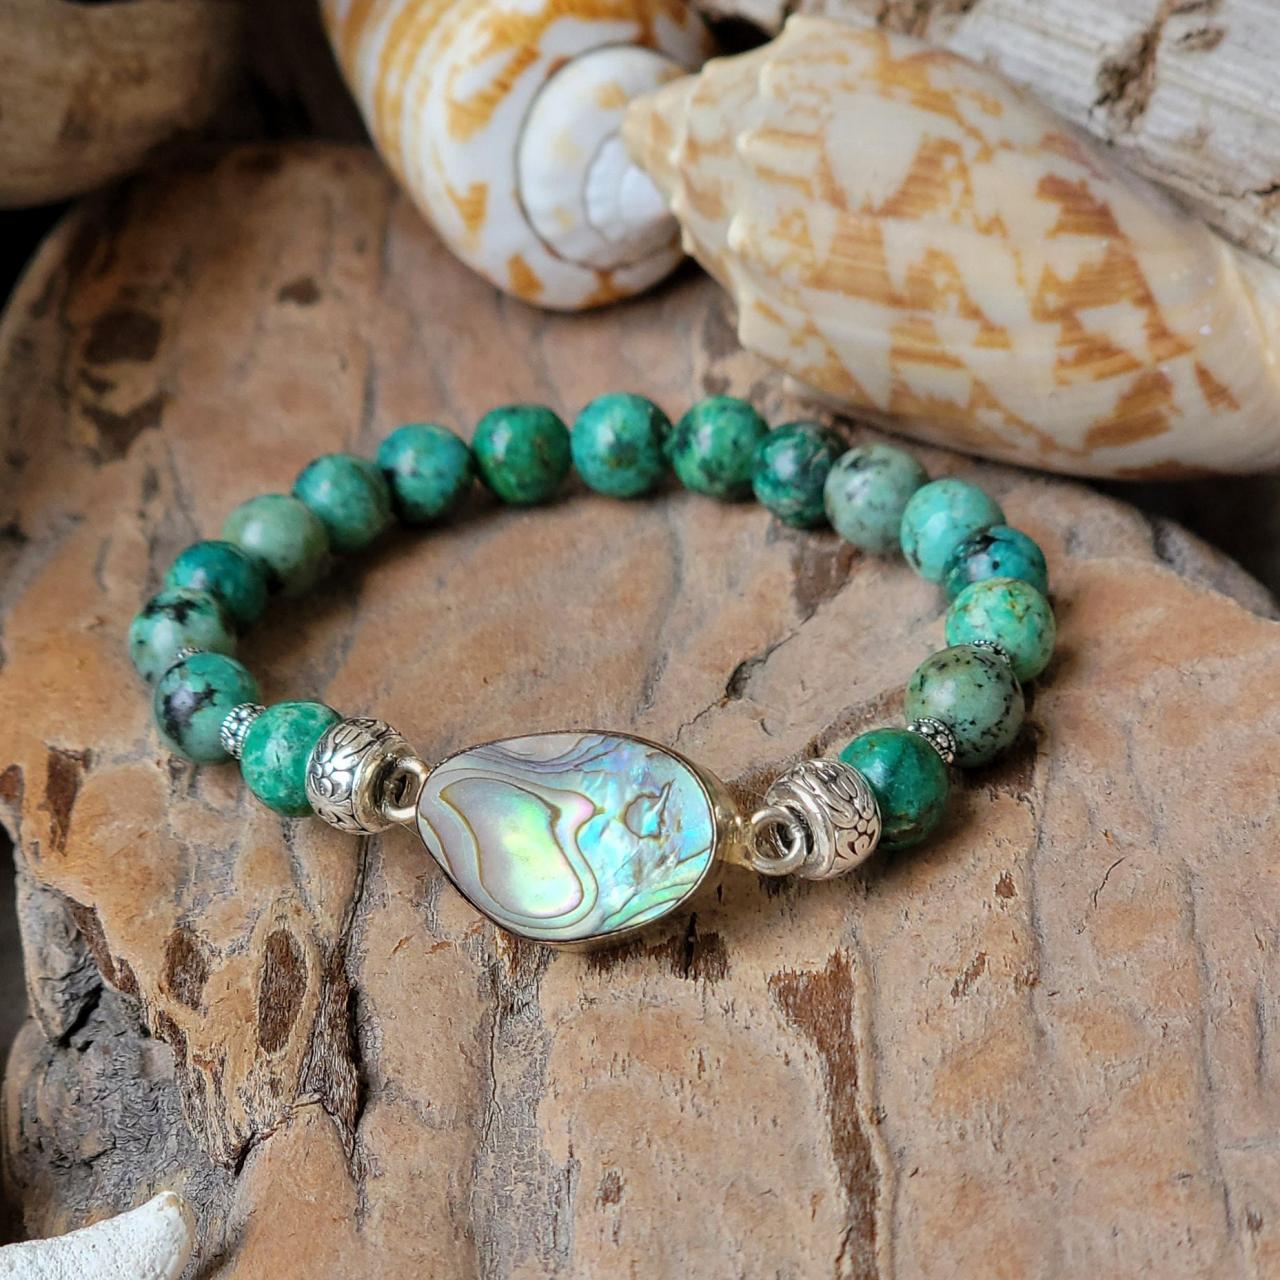 African Turquoise Natural Healing Gemstone Bracelet With Abalone Shell Bead